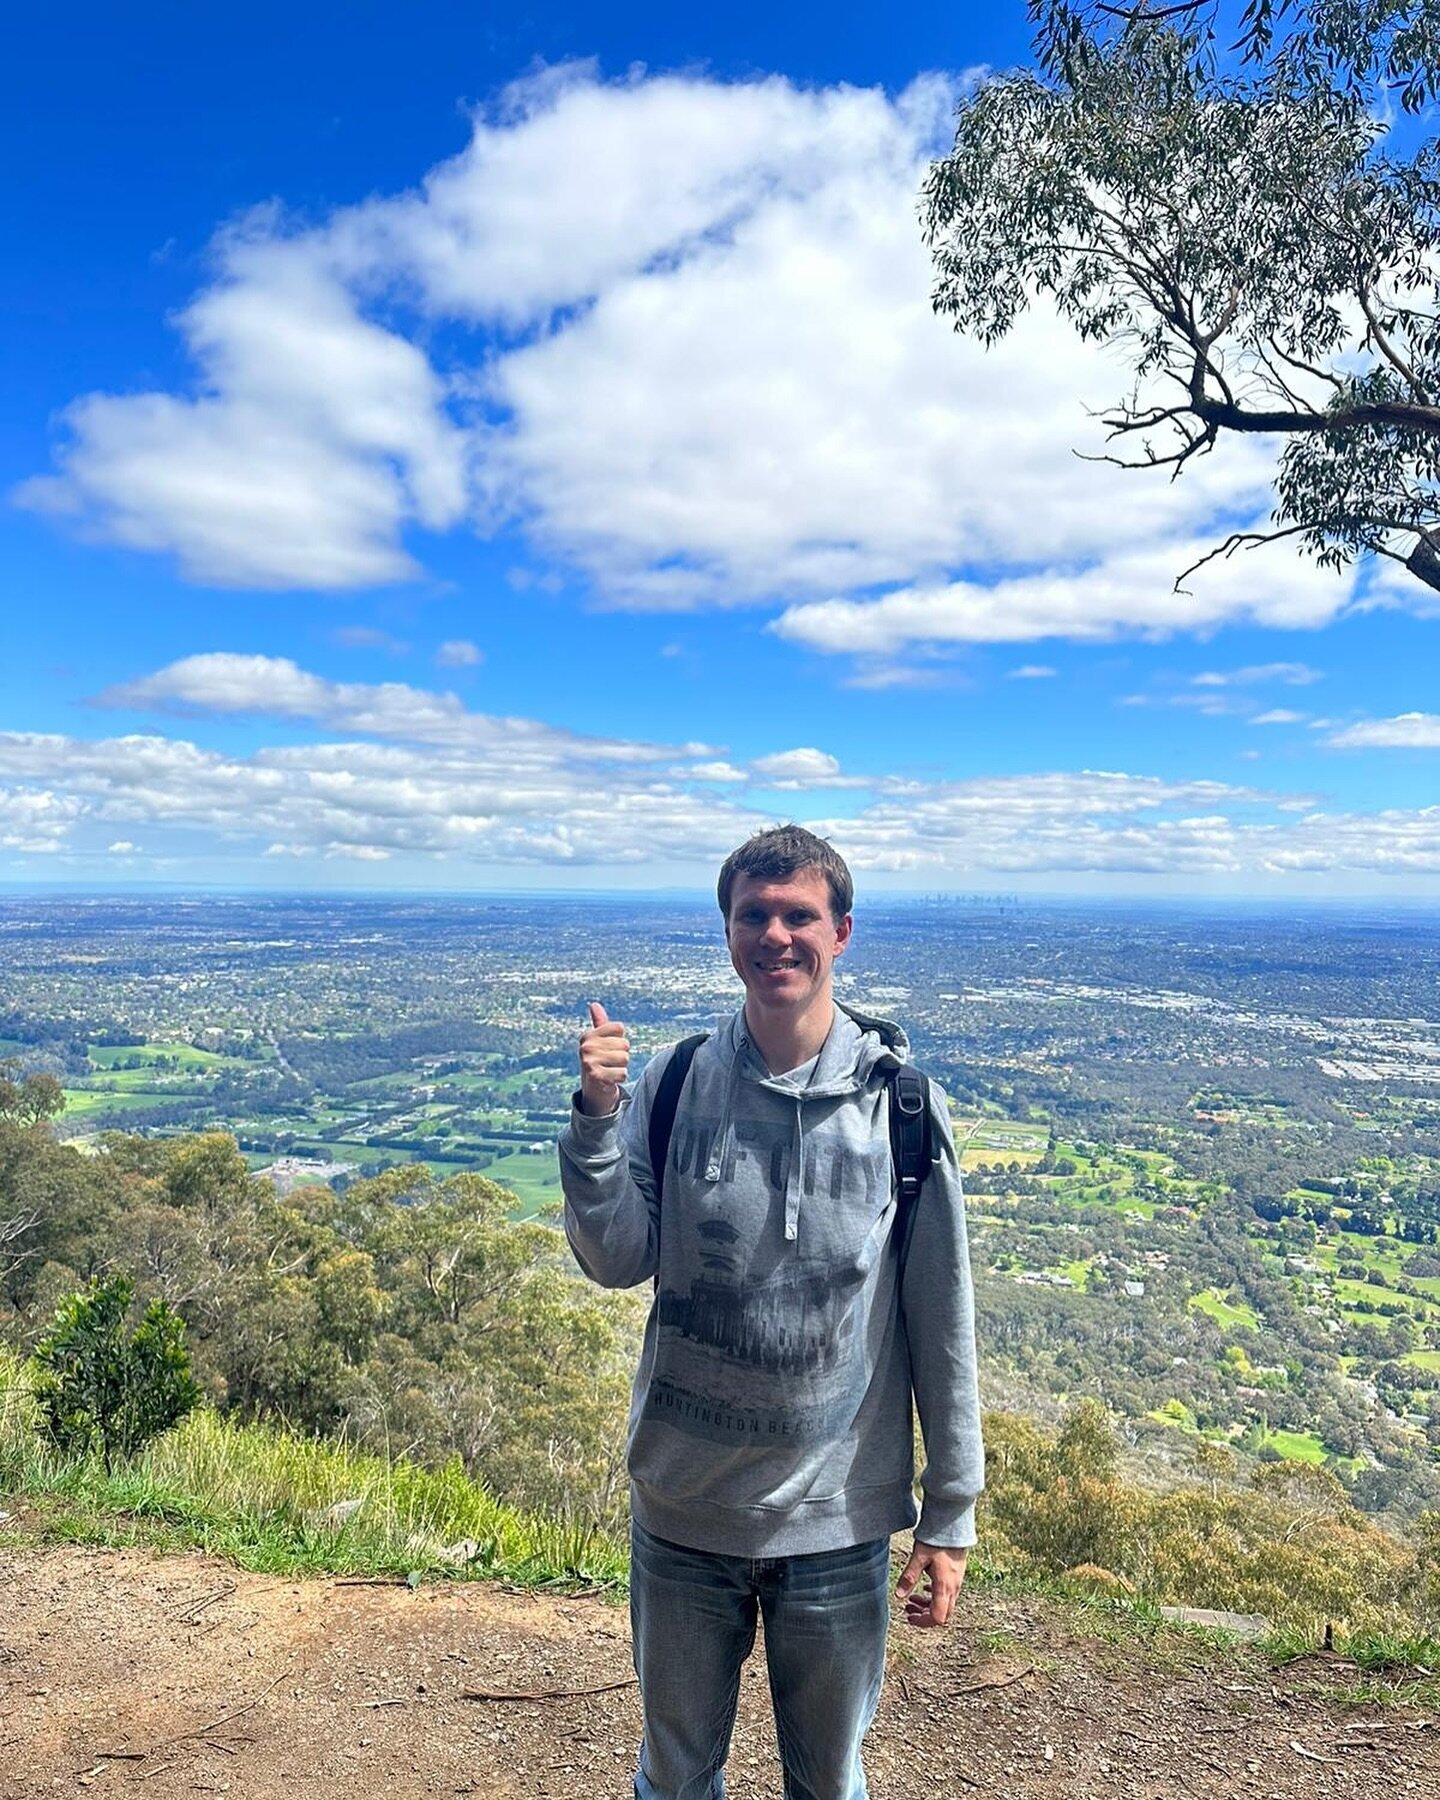 Travis going for a stroll on a nicer day than today ☀️ 🌳 

🏷️ 
#smallbusinessmelbourne #smallbusinessvictoria #ndis #ndissupport #ndisaustralia #ndissupportcoordination #supportcoordination #disabilityawareness #disabilityinclusion #disabilitysuppo